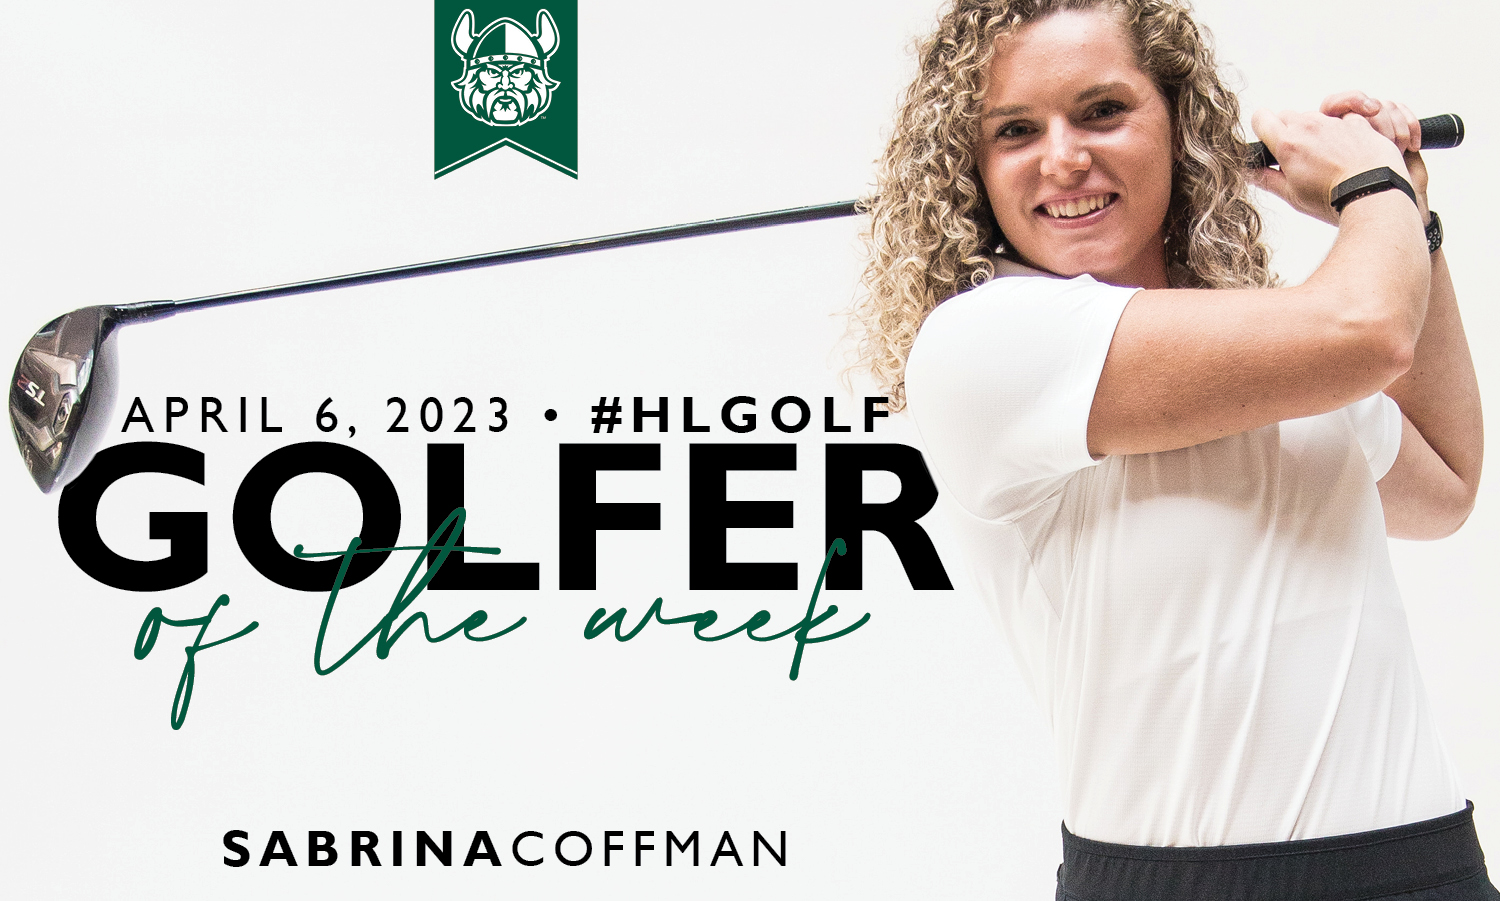 Coffman Named #HLGOLF Women’s Player of the Week